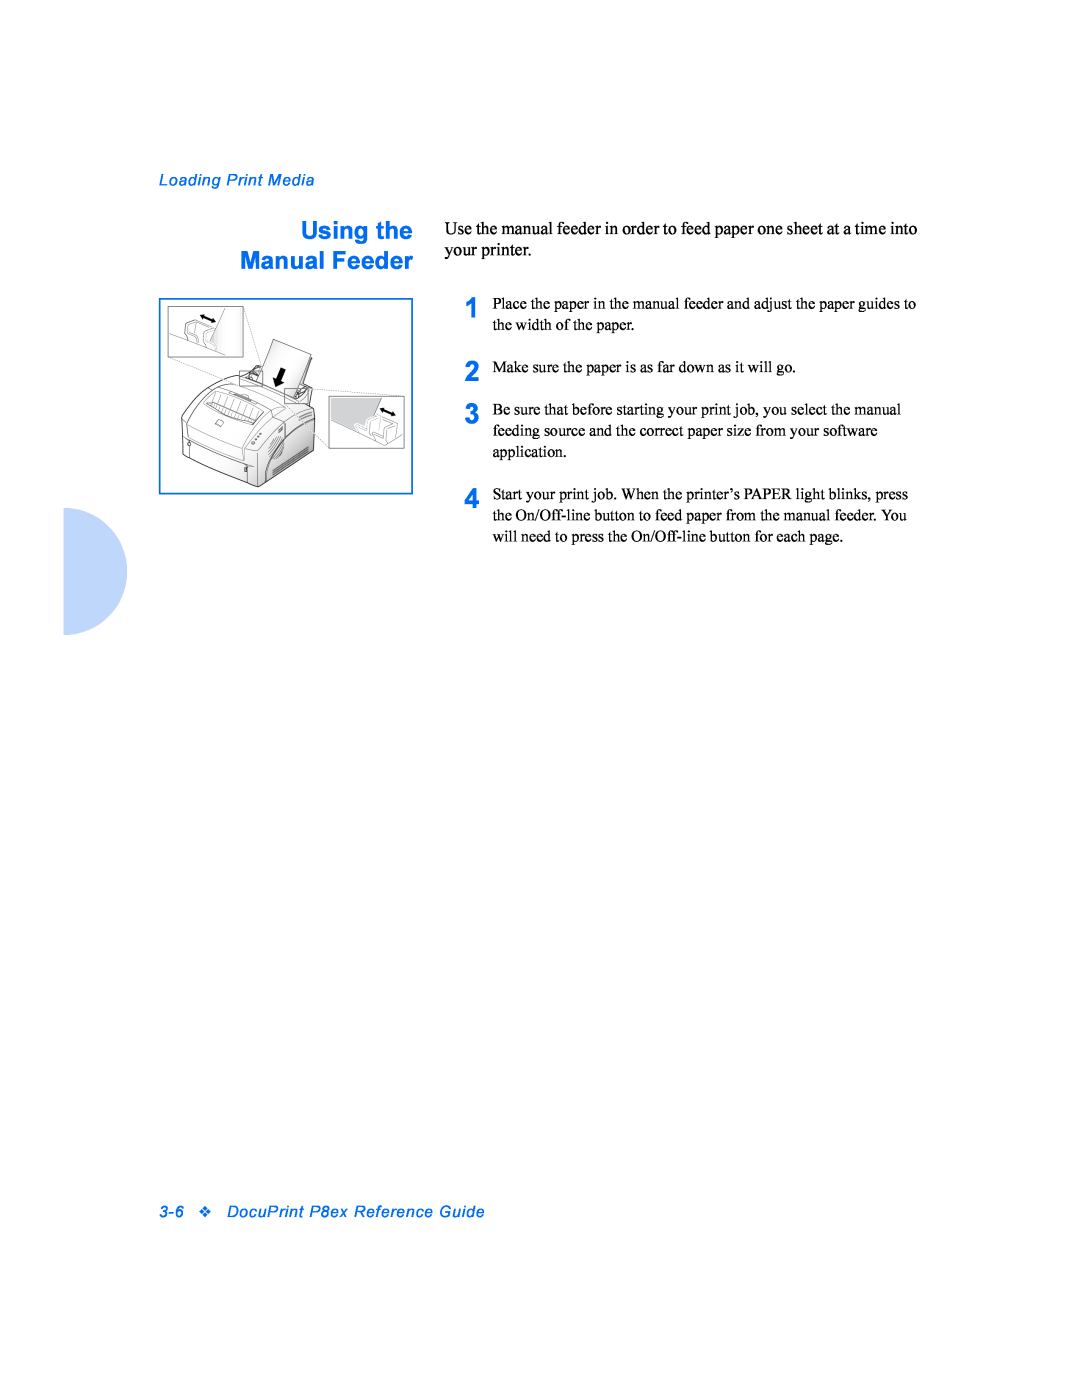 Xerox manual Using the Manual Feeder, Loading Print Media, 3-6DocuPrint P8ex Reference Guide 